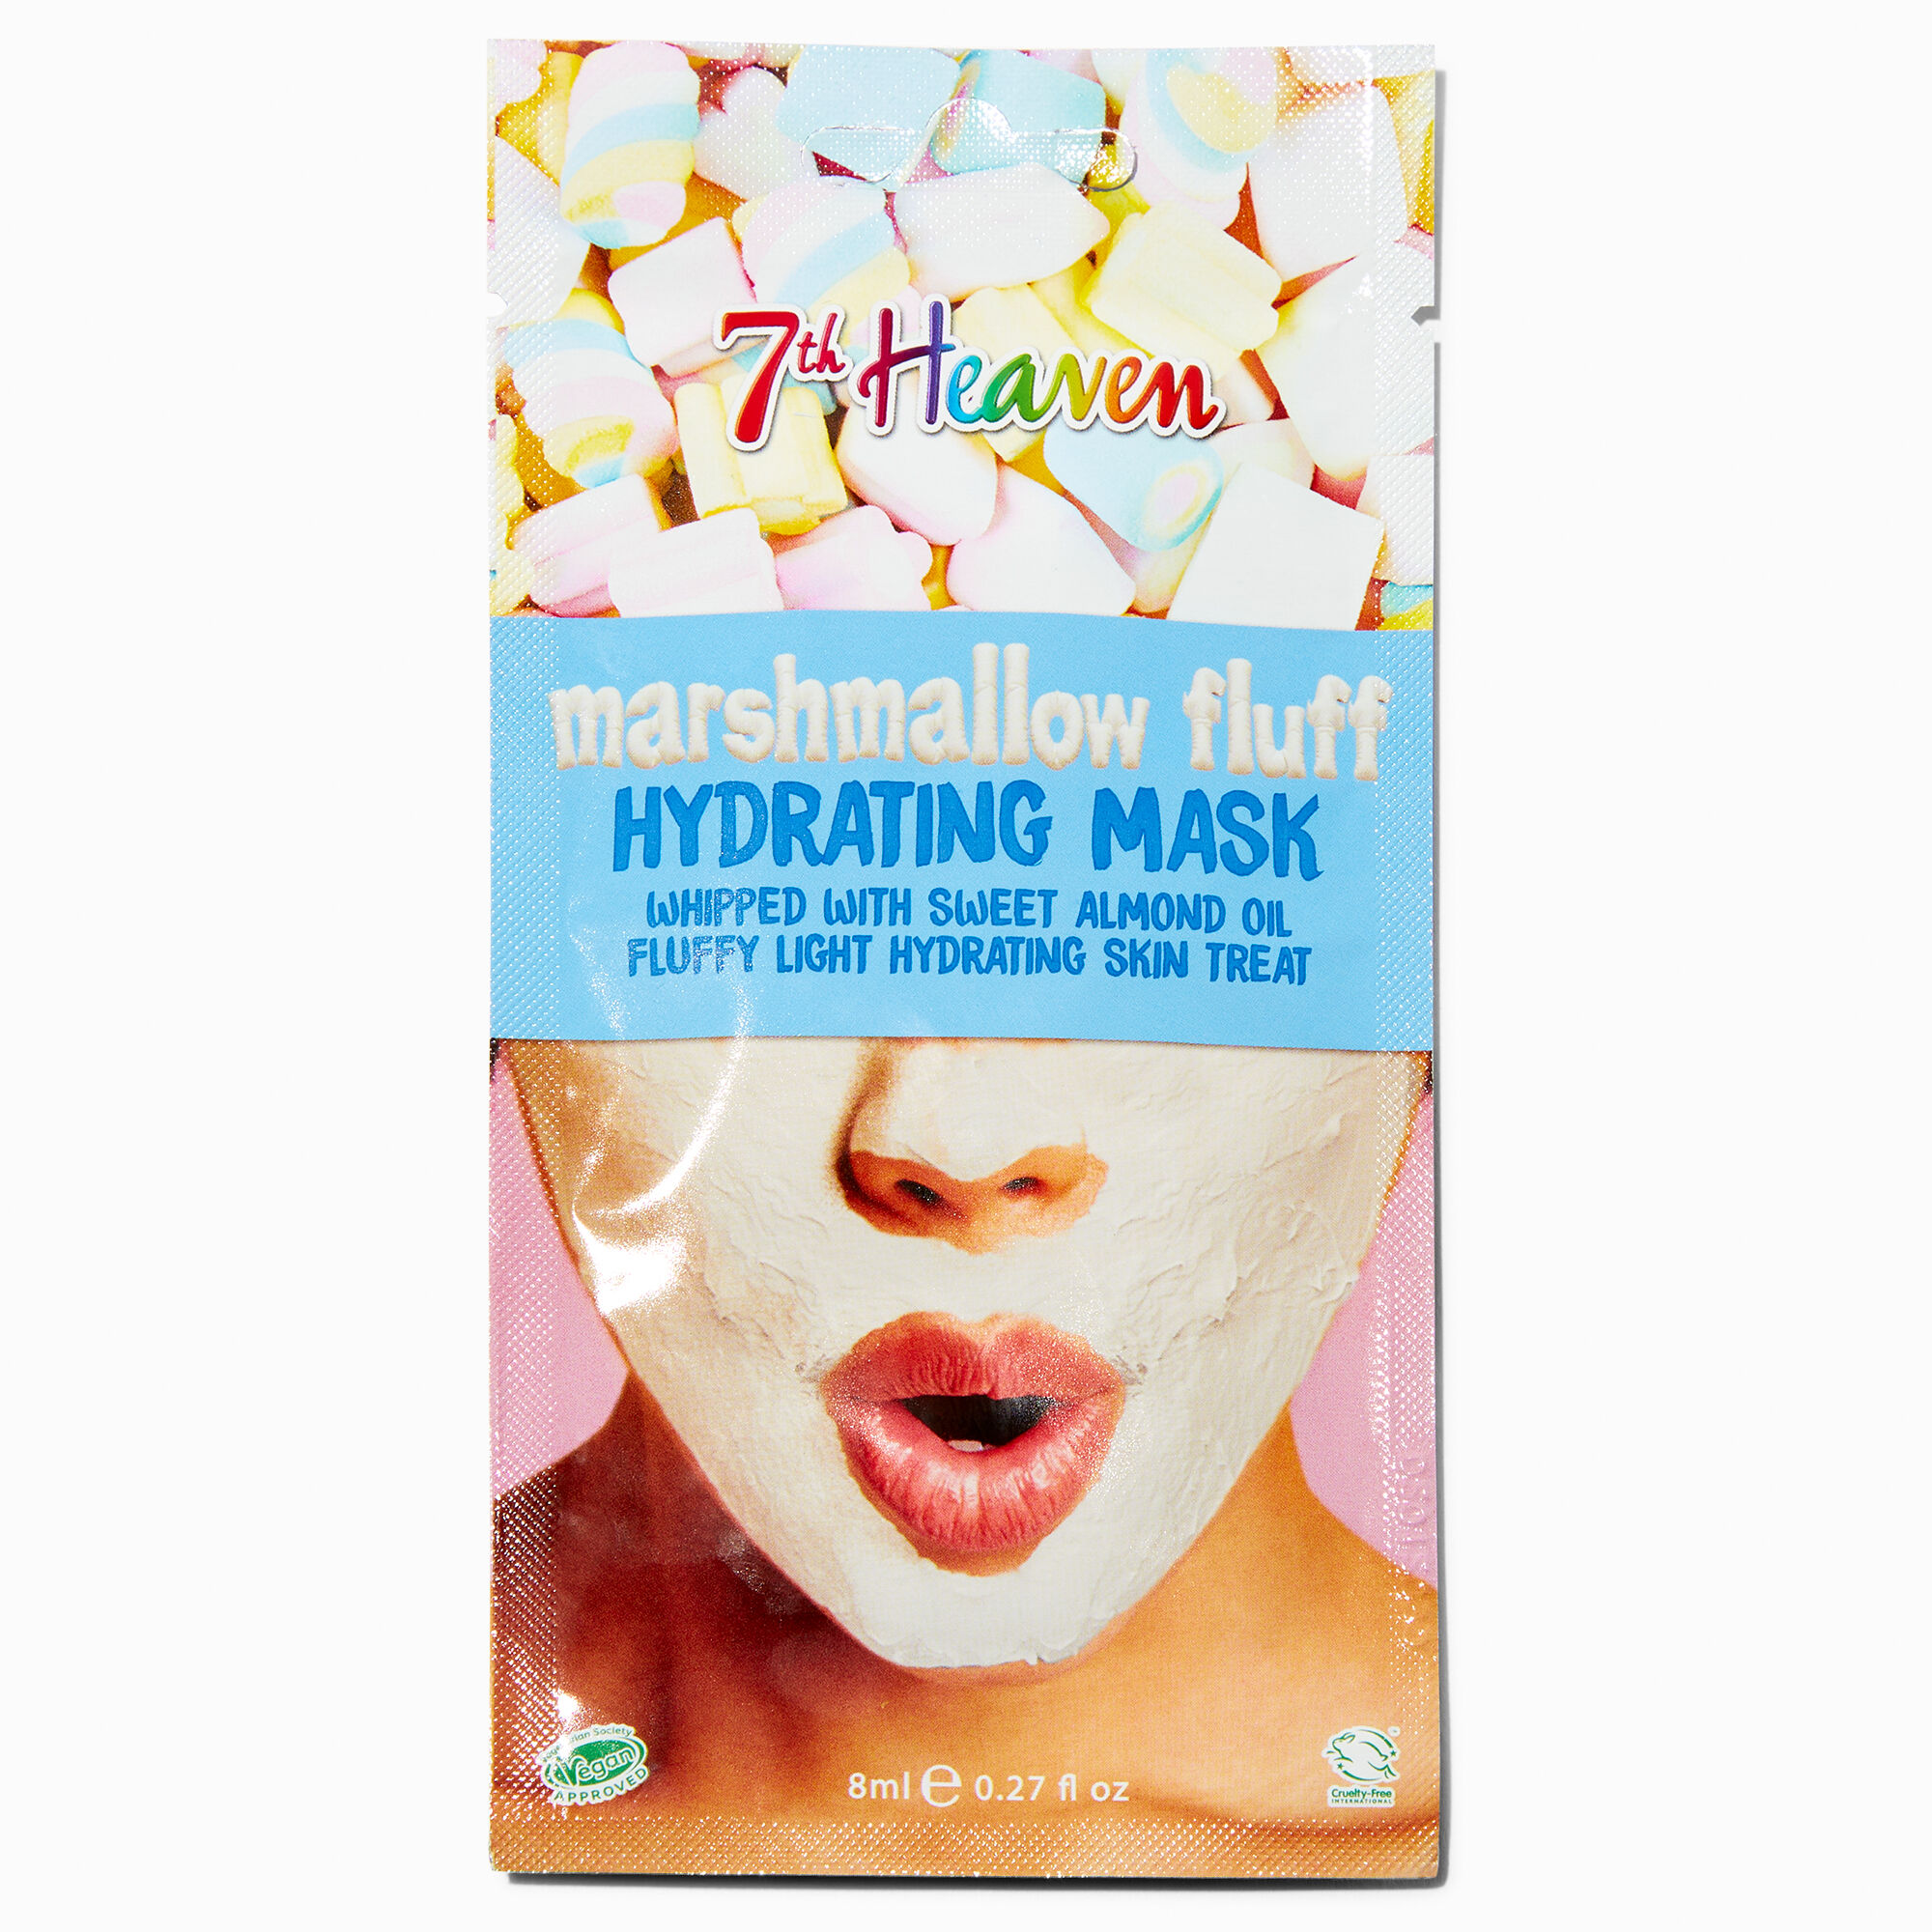 View Claires 7Th Heaven Marshmallow Fluff Hydrating Mask information